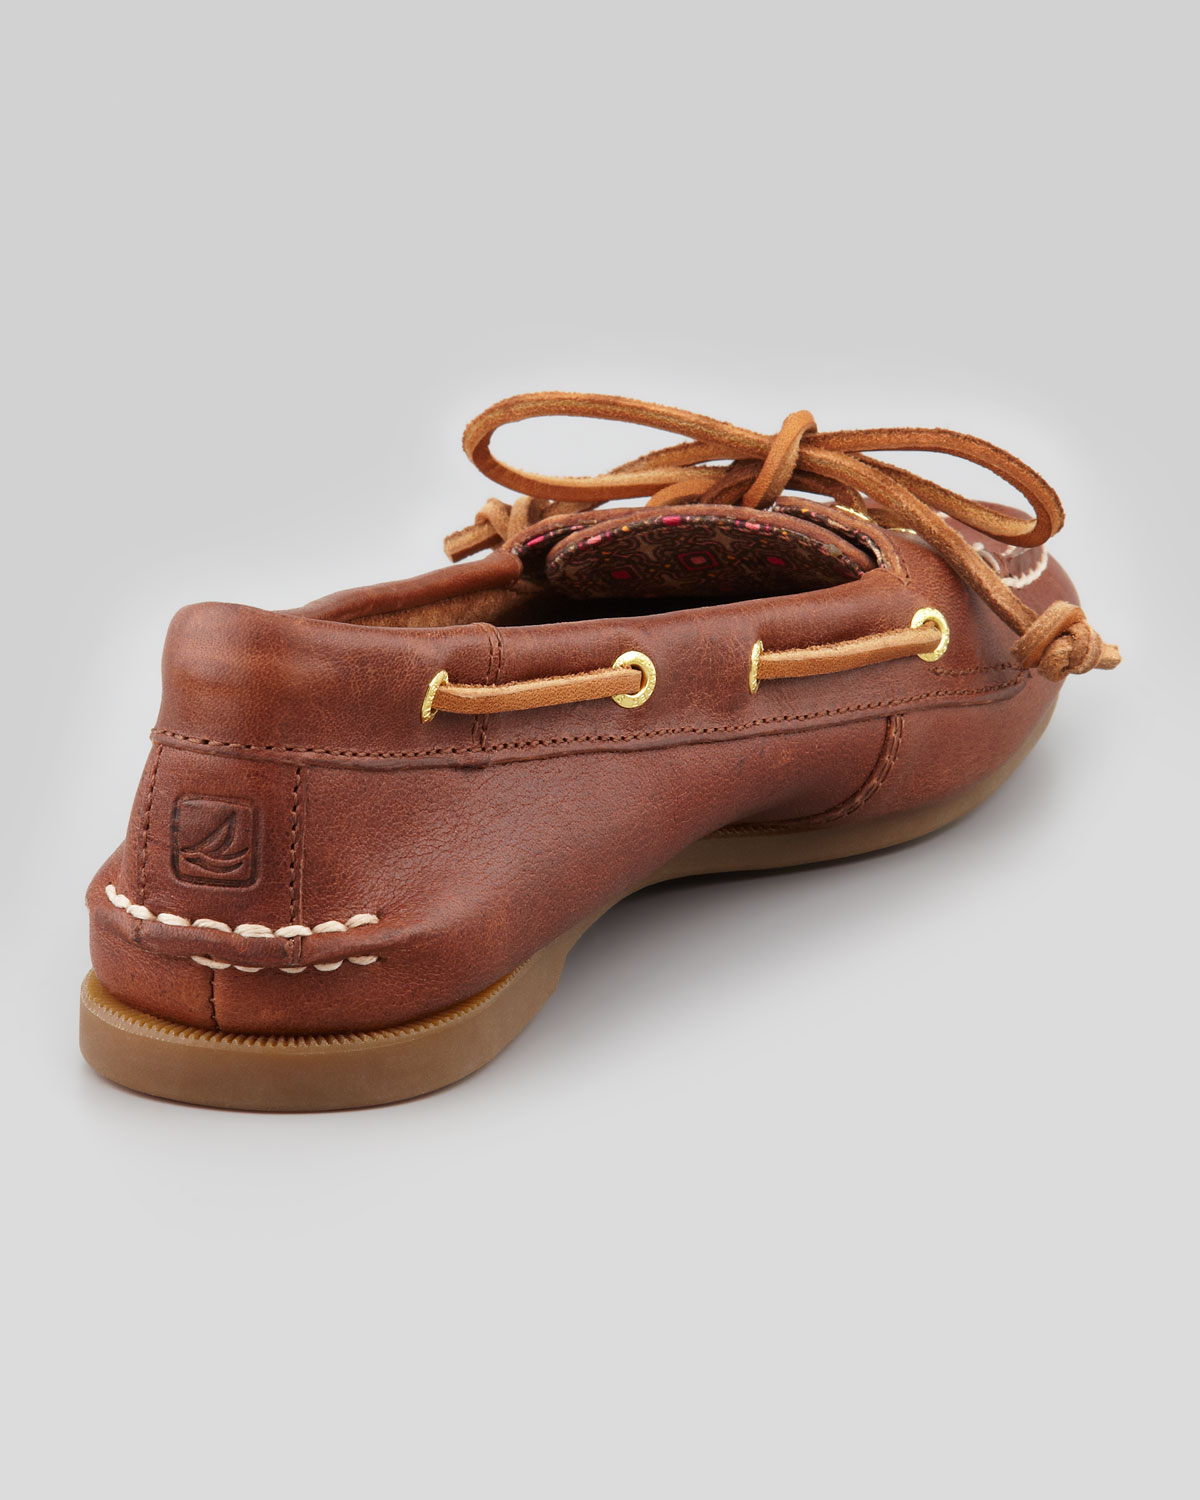 Are Sperry Boat Shoes Still In Style